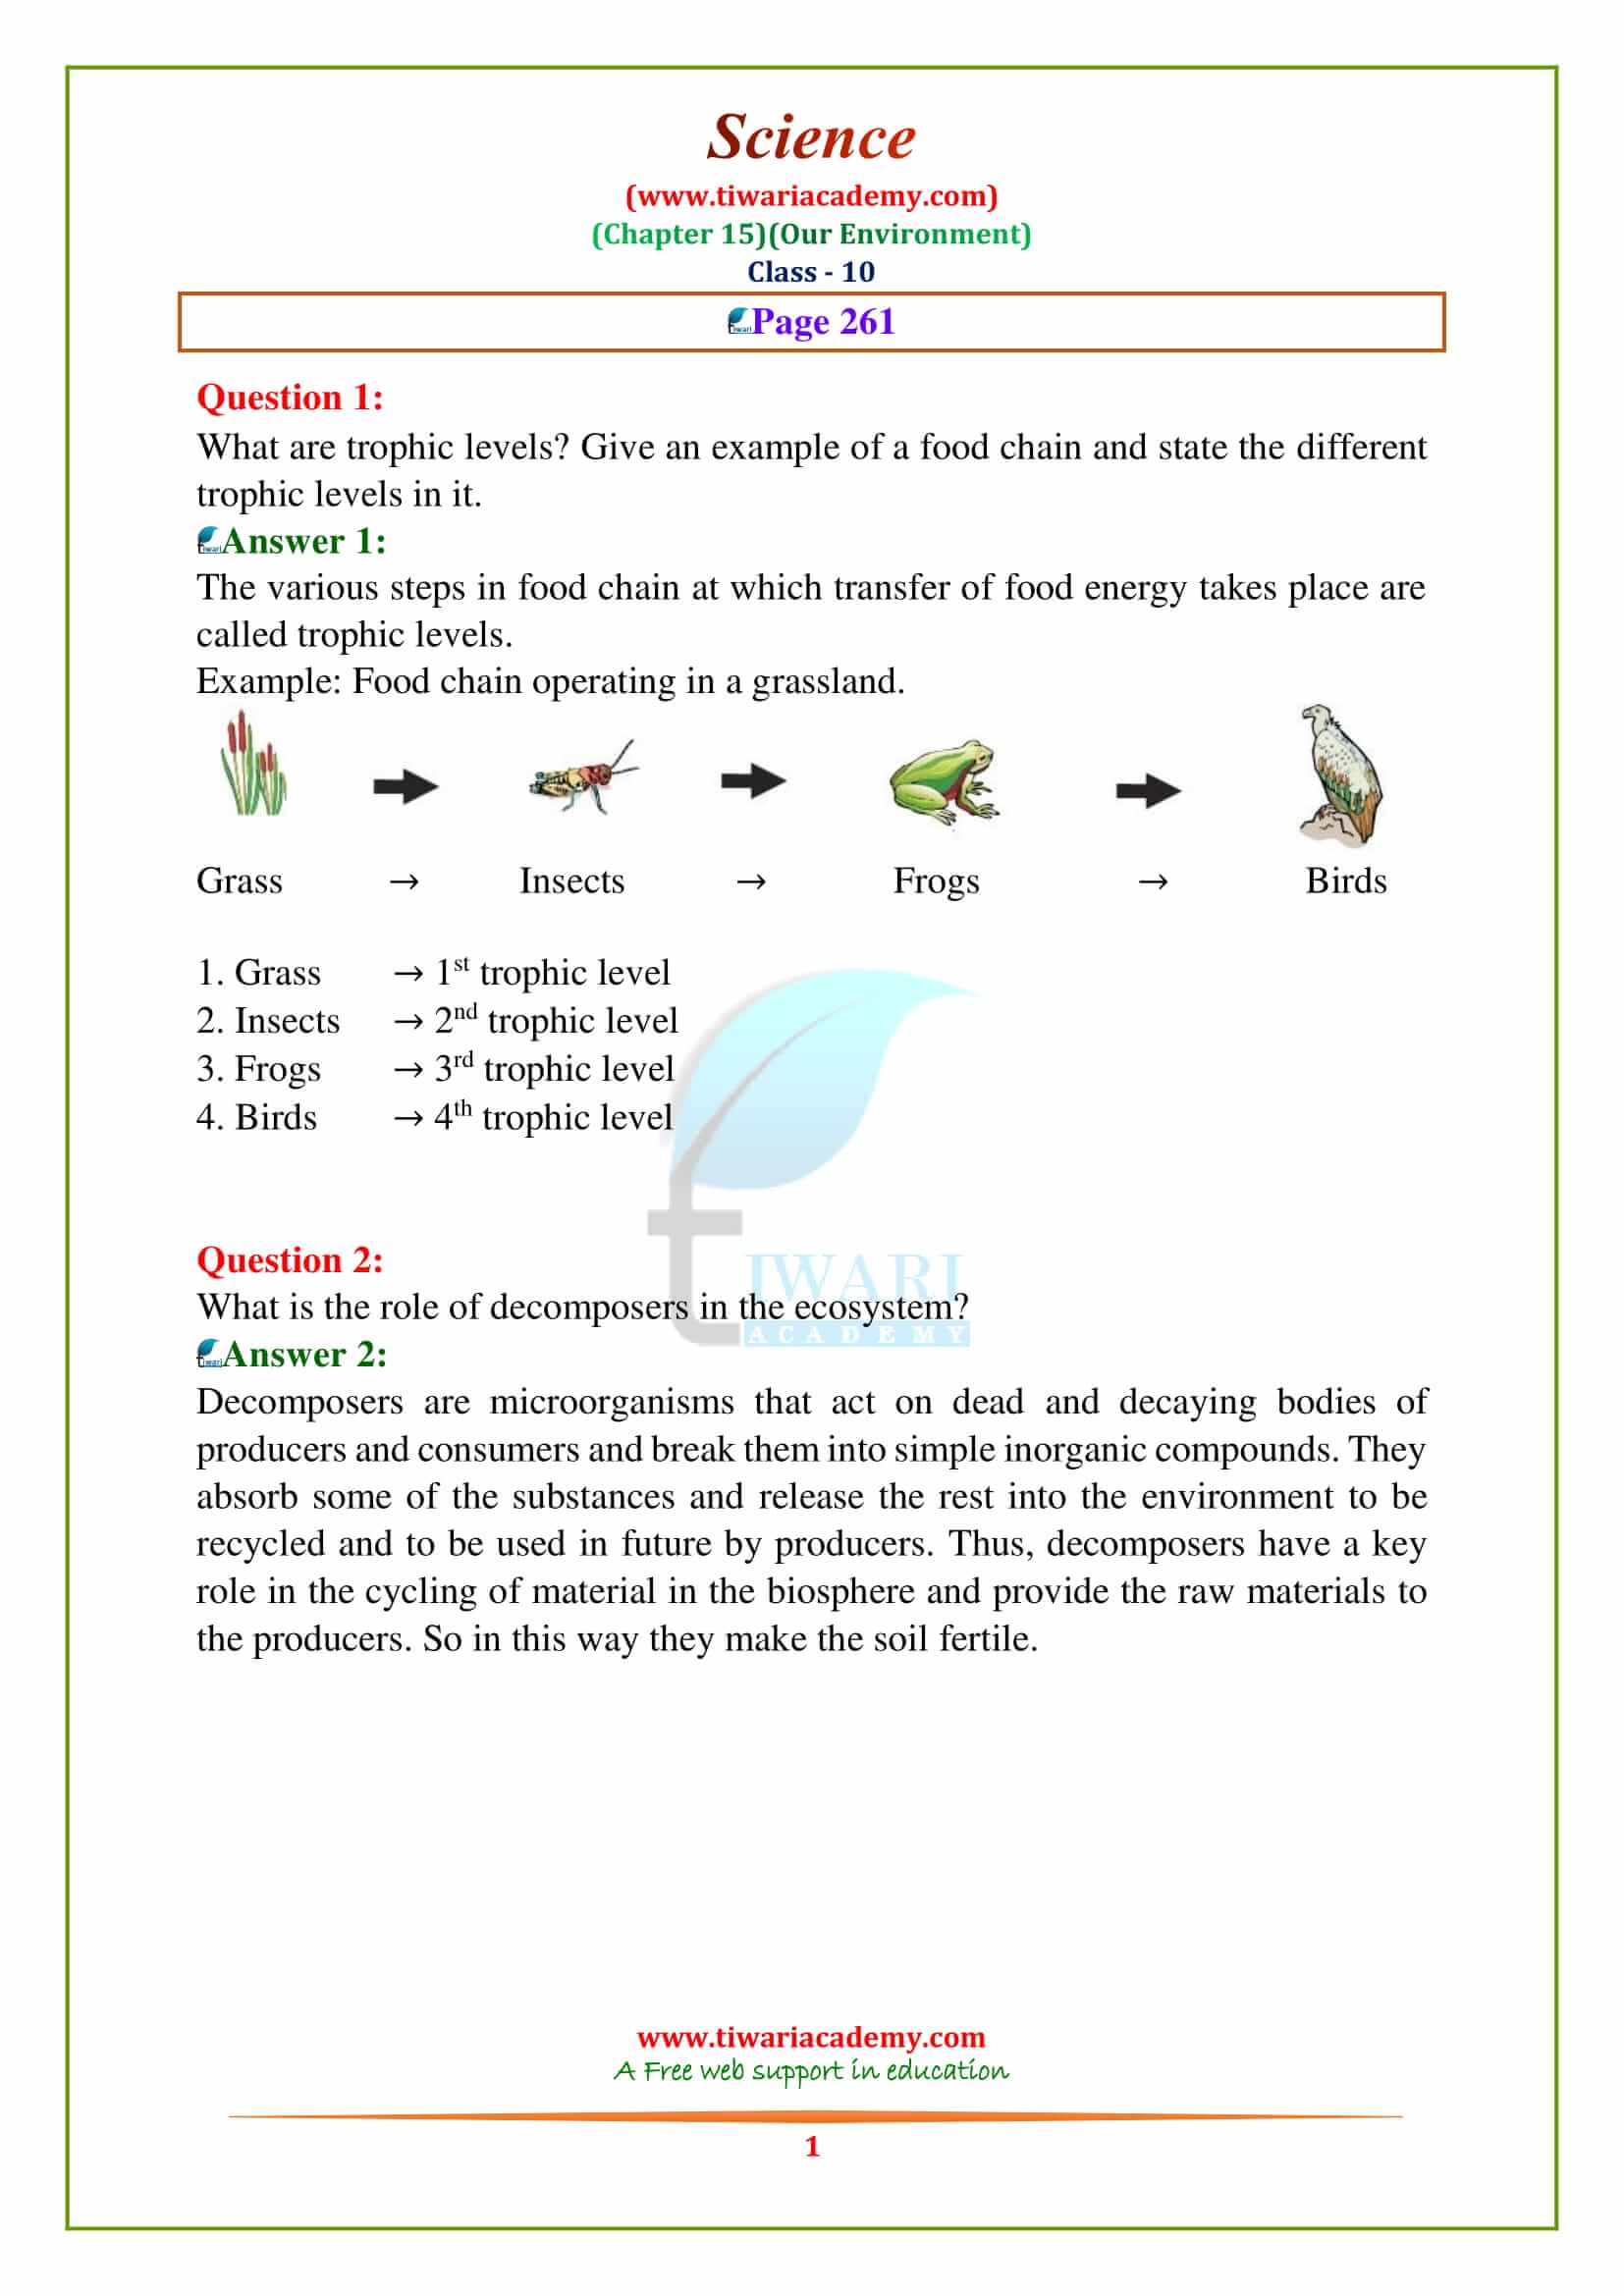 NCERT Solutions for Class 10 Science Chapter 15 Intext questions given on page 261